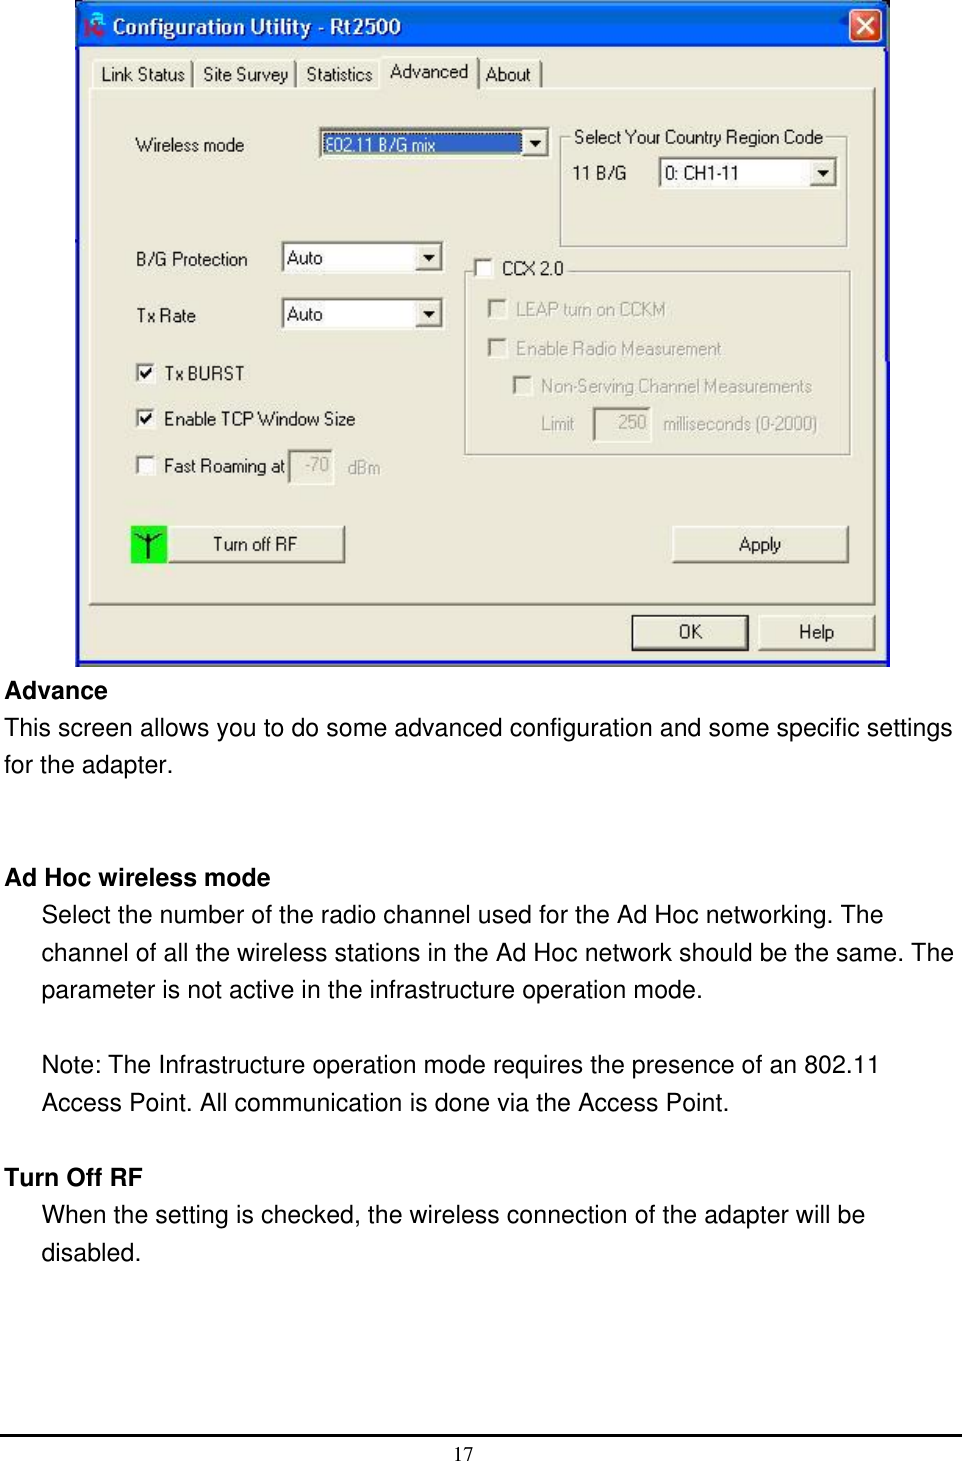   Advance This screen allows you to do some advanced configuration and some specific settings for the adapter.   Ad Hoc wireless mode Select the number of the radio channel used for the Ad Hoc networking. The channel of all the wireless stations in the Ad Hoc network should be the same. The parameter is not active in the infrastructure operation mode.  Note: The Infrastructure operation mode requires the presence of an 802.11 Access Point. All communication is done via the Access Point.  Turn Off RF   When the setting is checked, the wireless connection of the adapter will be disabled.   17  